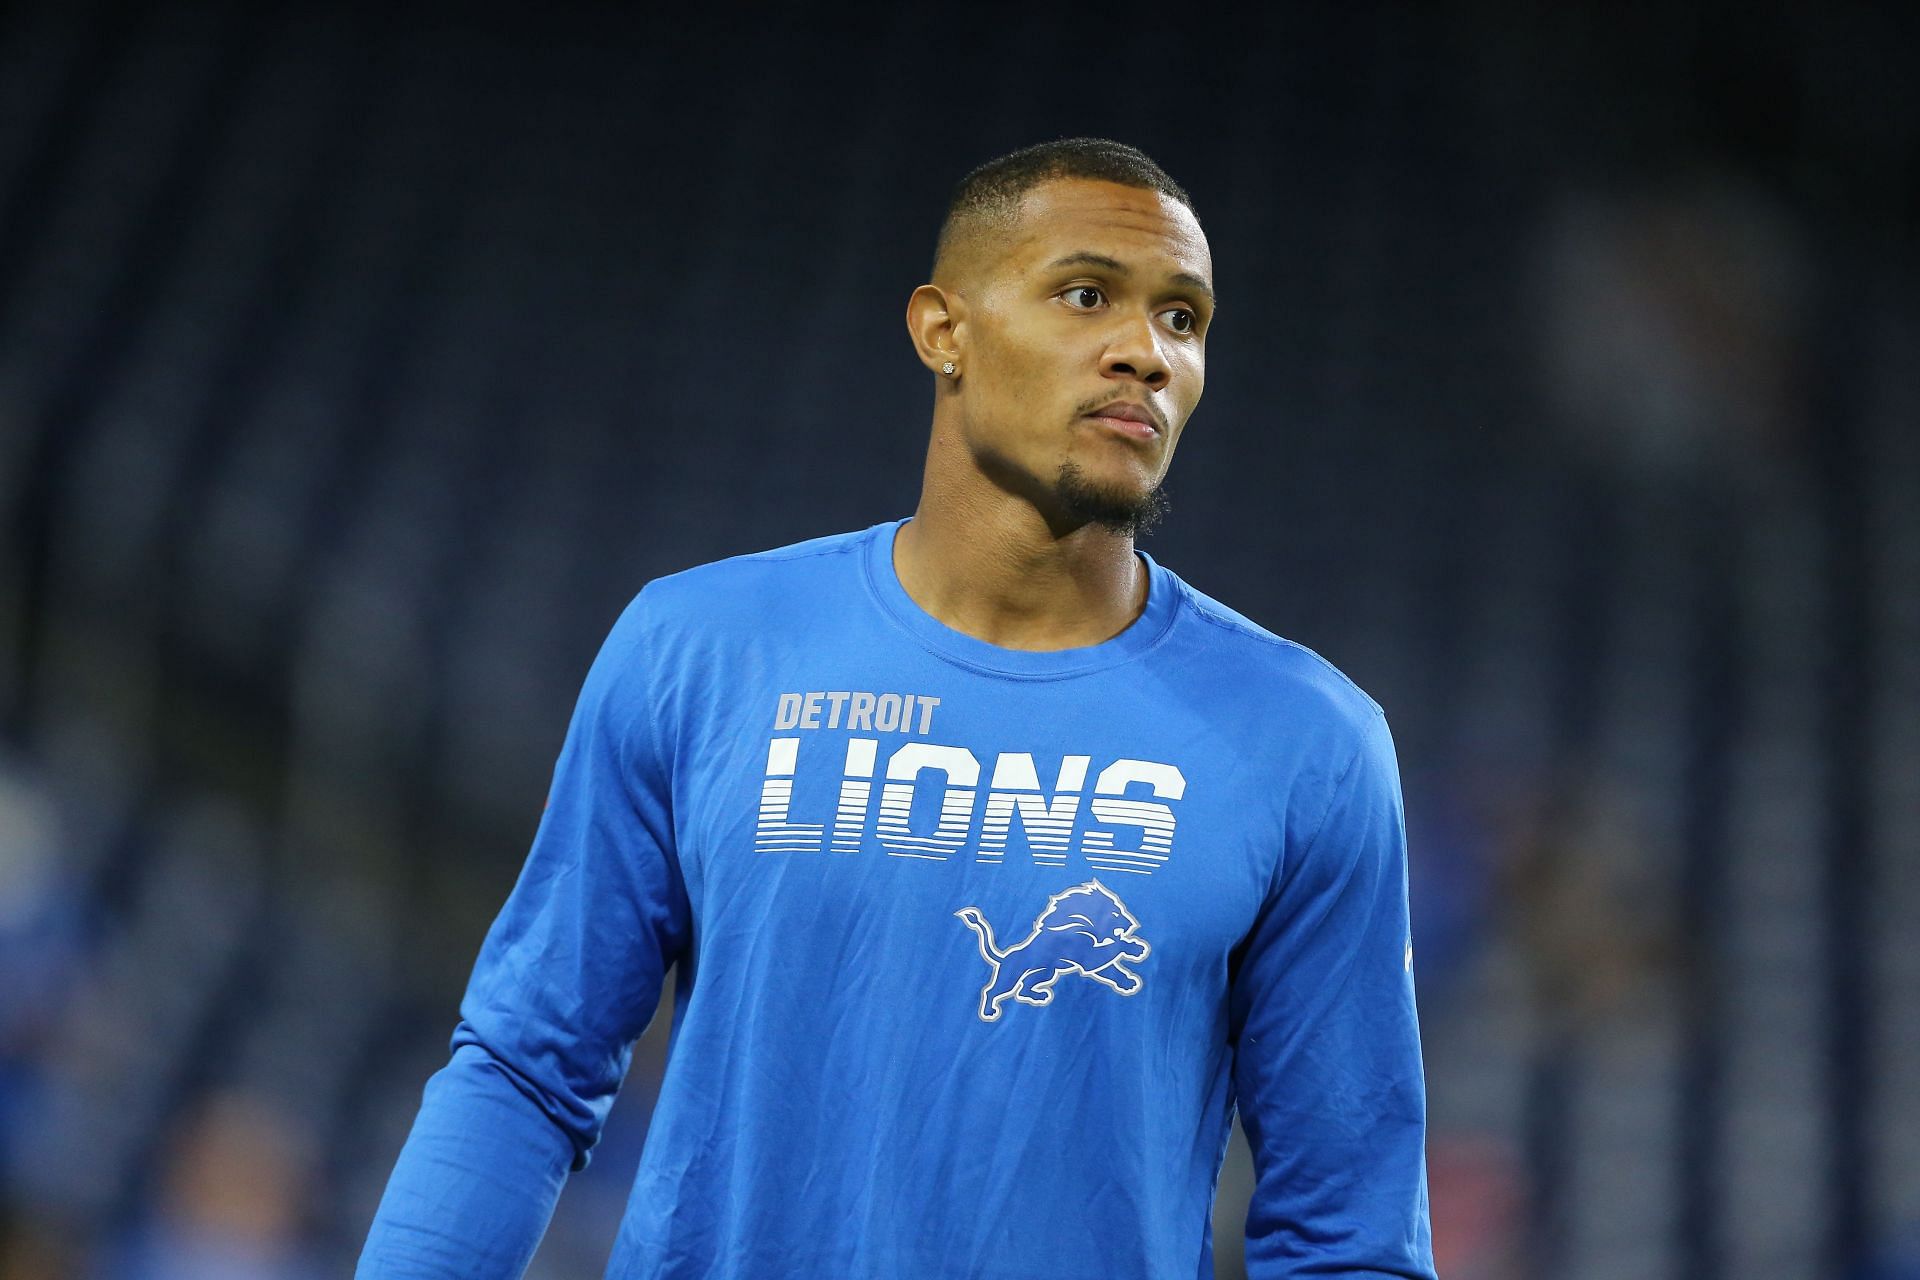 Kenny Golladay #19 of the Detroit Lions warms up before the start of the game against the Kansas City Chiefs at Ford Field on September 29, 2019, in Detroit, Michigan.